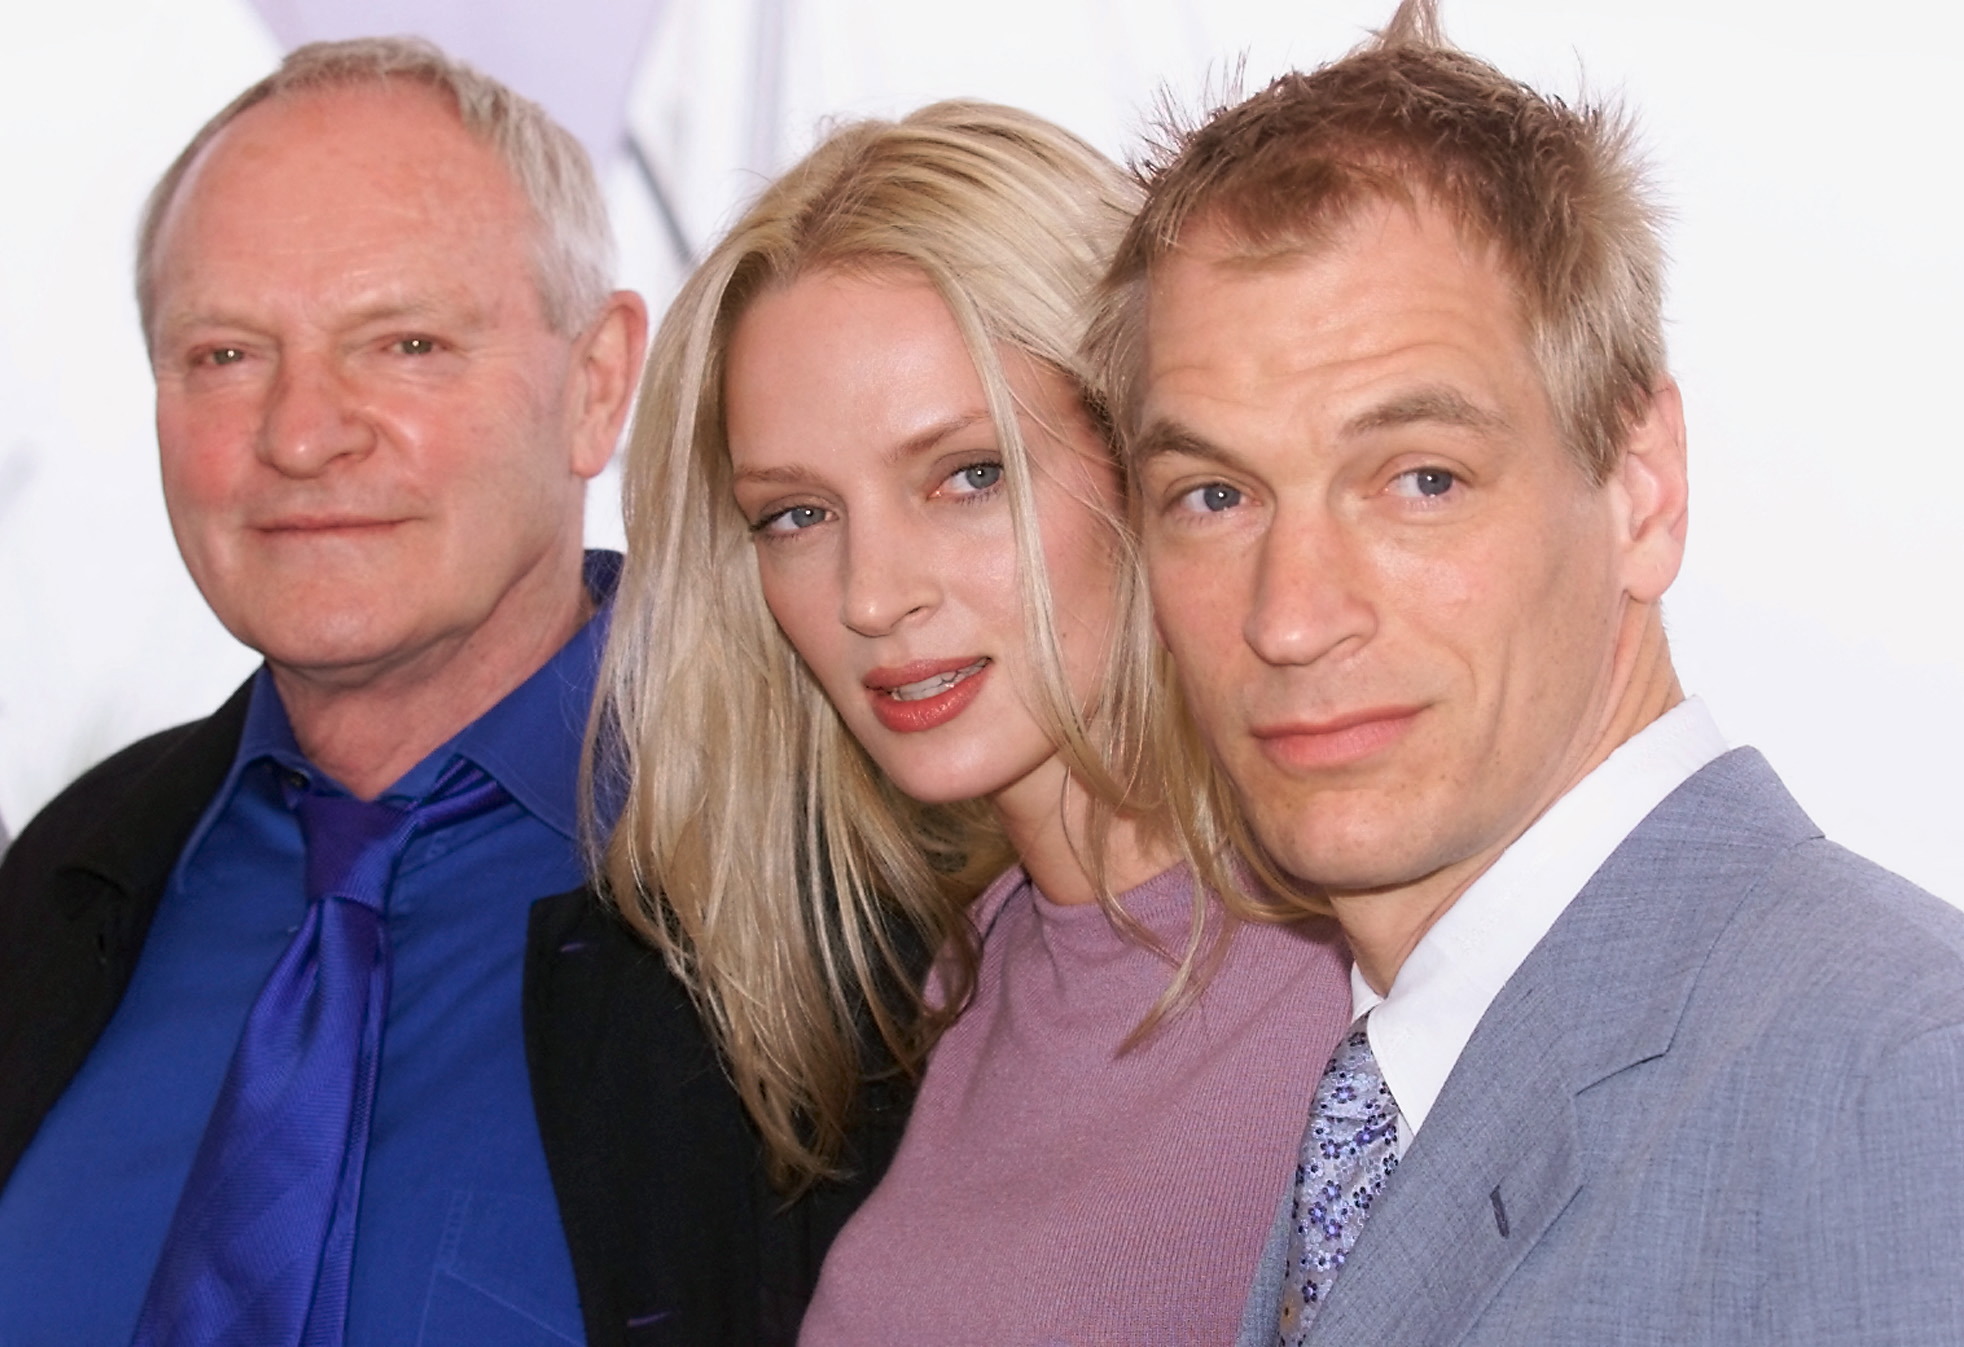 Julian Glover, Uma Thurman, and Julian Sands at the photocall of their film "Vatel" in 2000 | Source: Getty Images